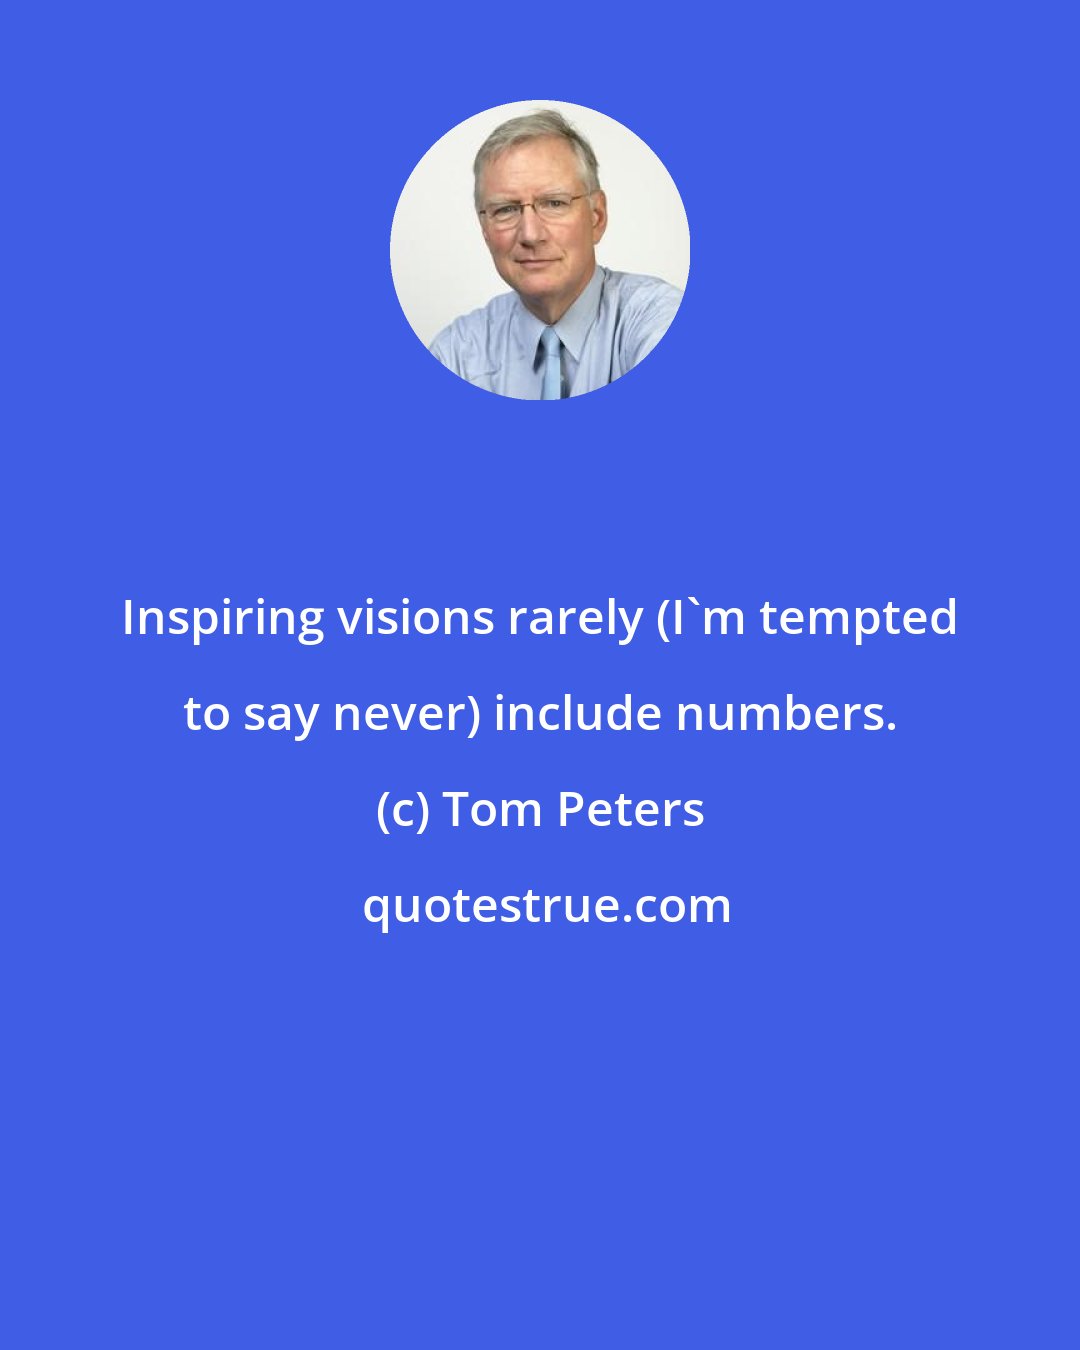 Tom Peters: Inspiring visions rarely (I'm tempted to say never) include numbers.